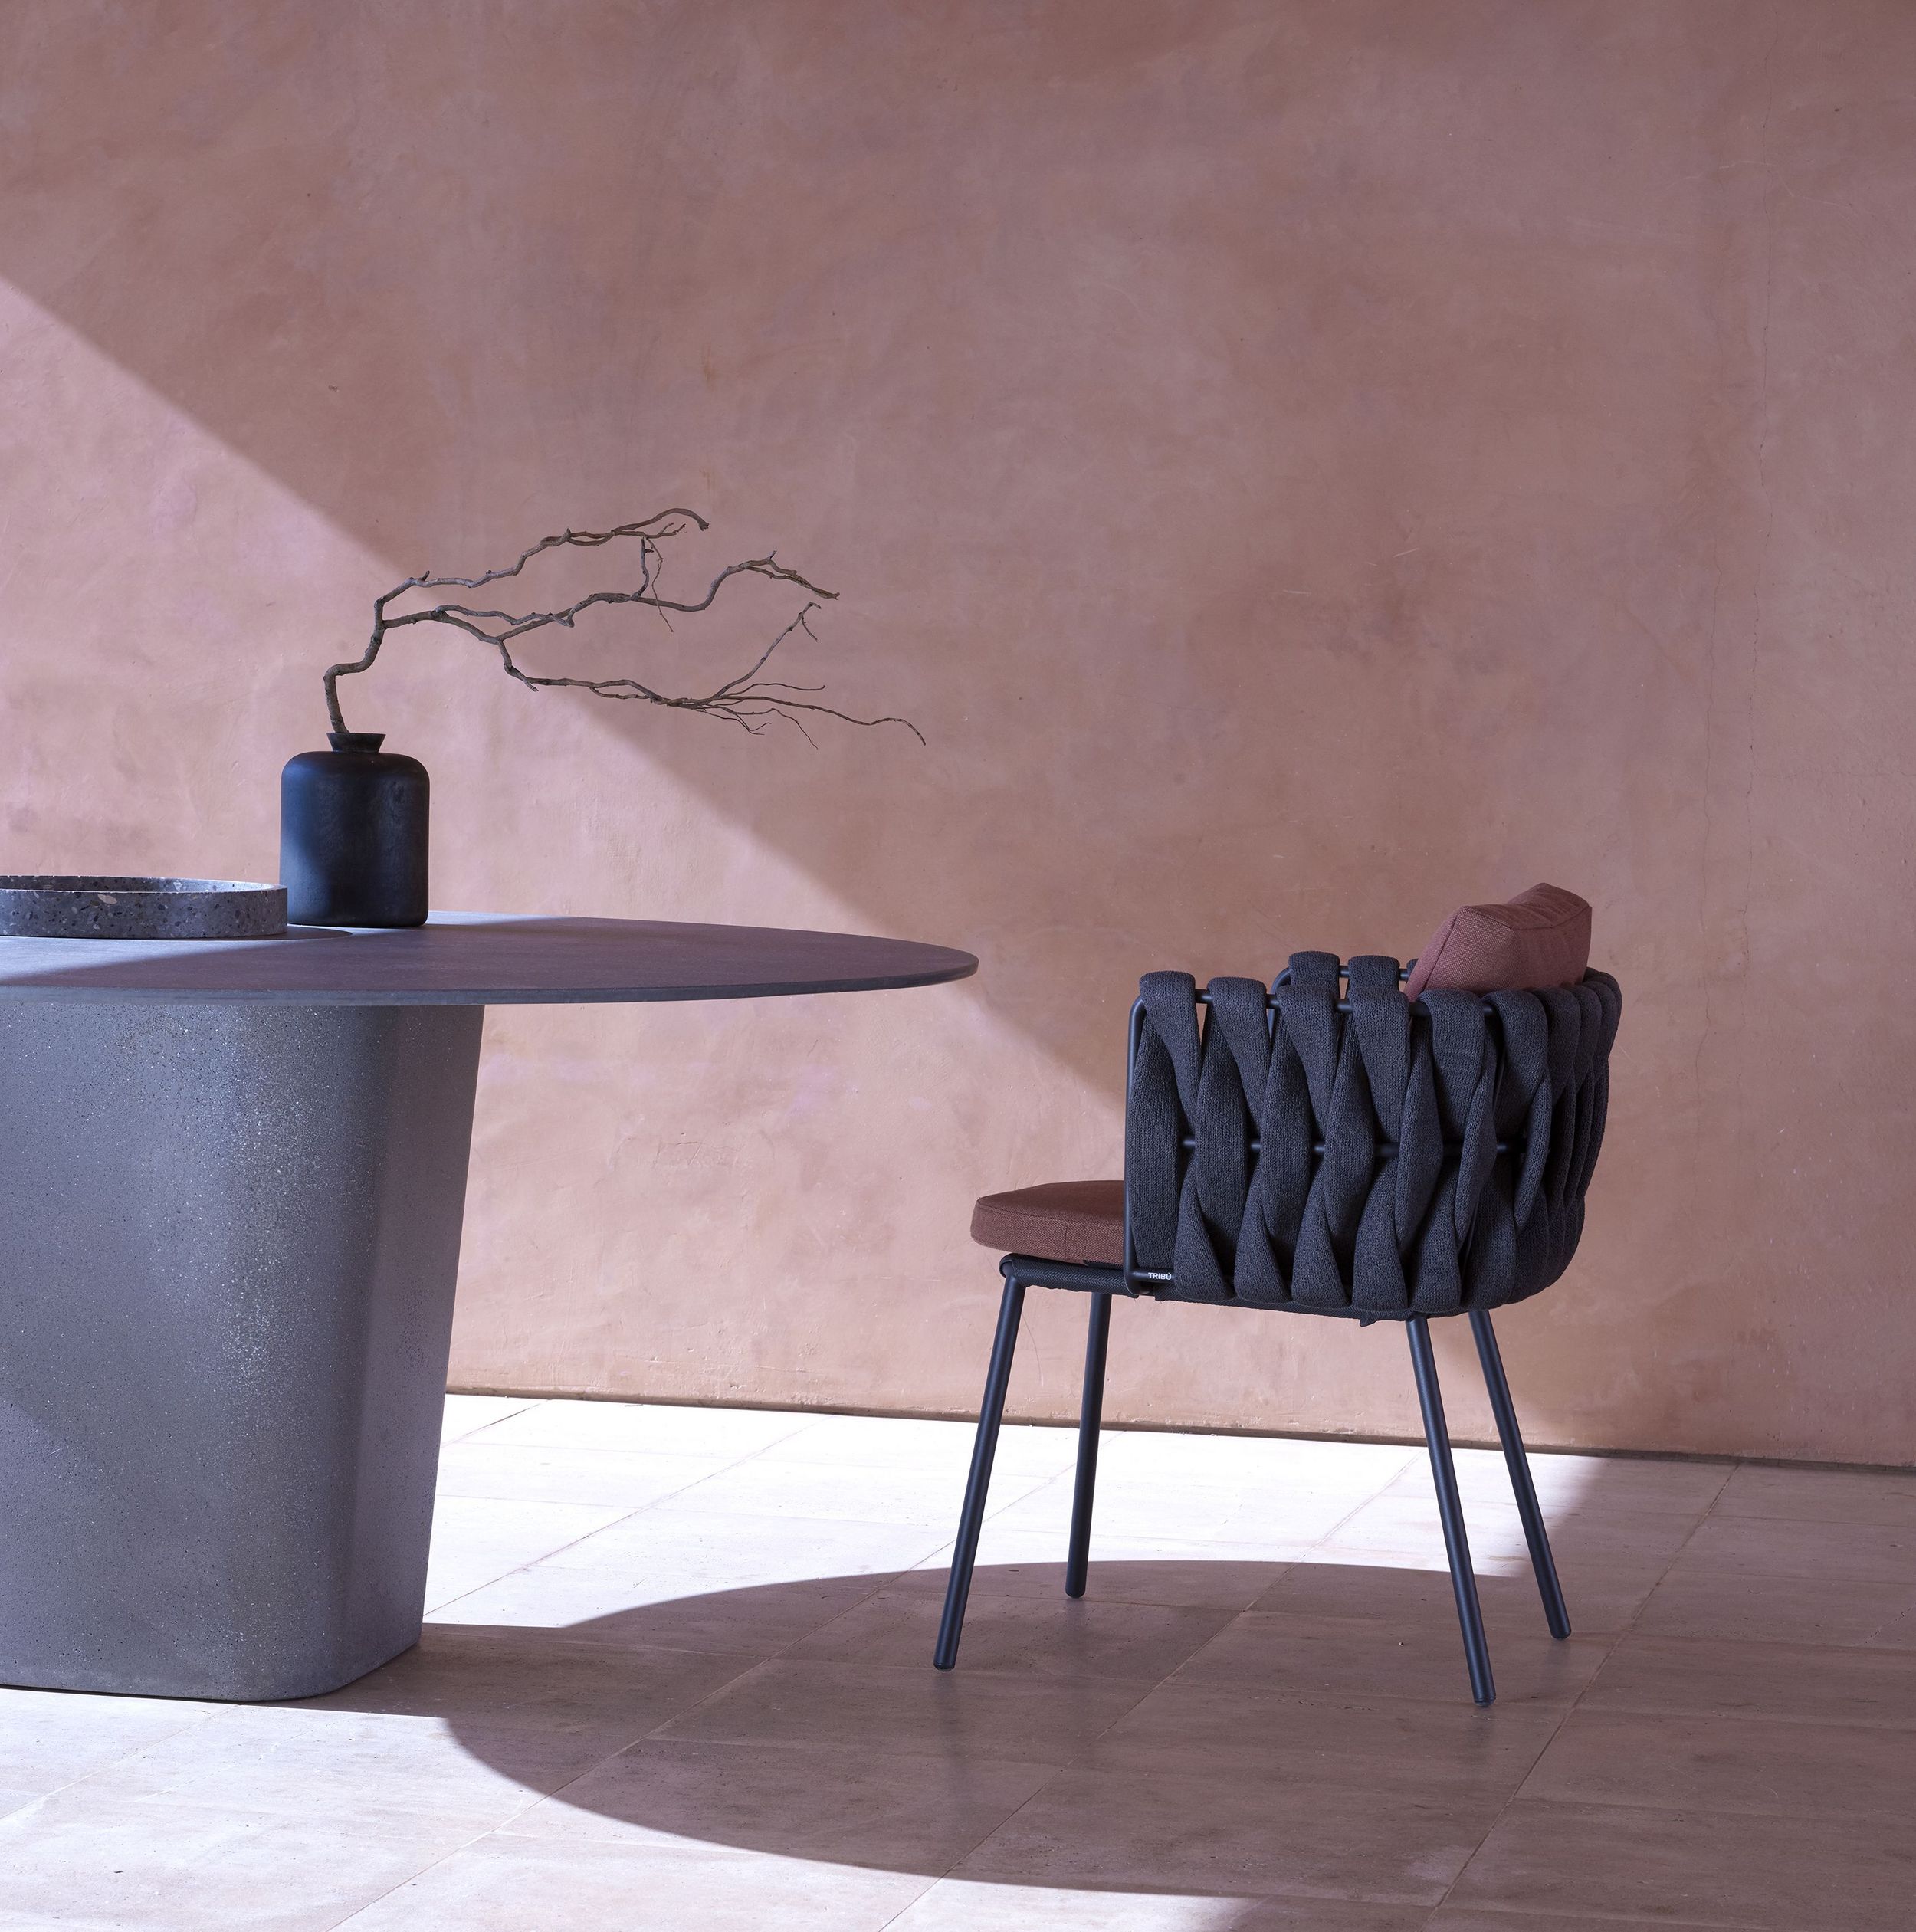 Tosca armchair and Tao table by Monica Armani for Tribù